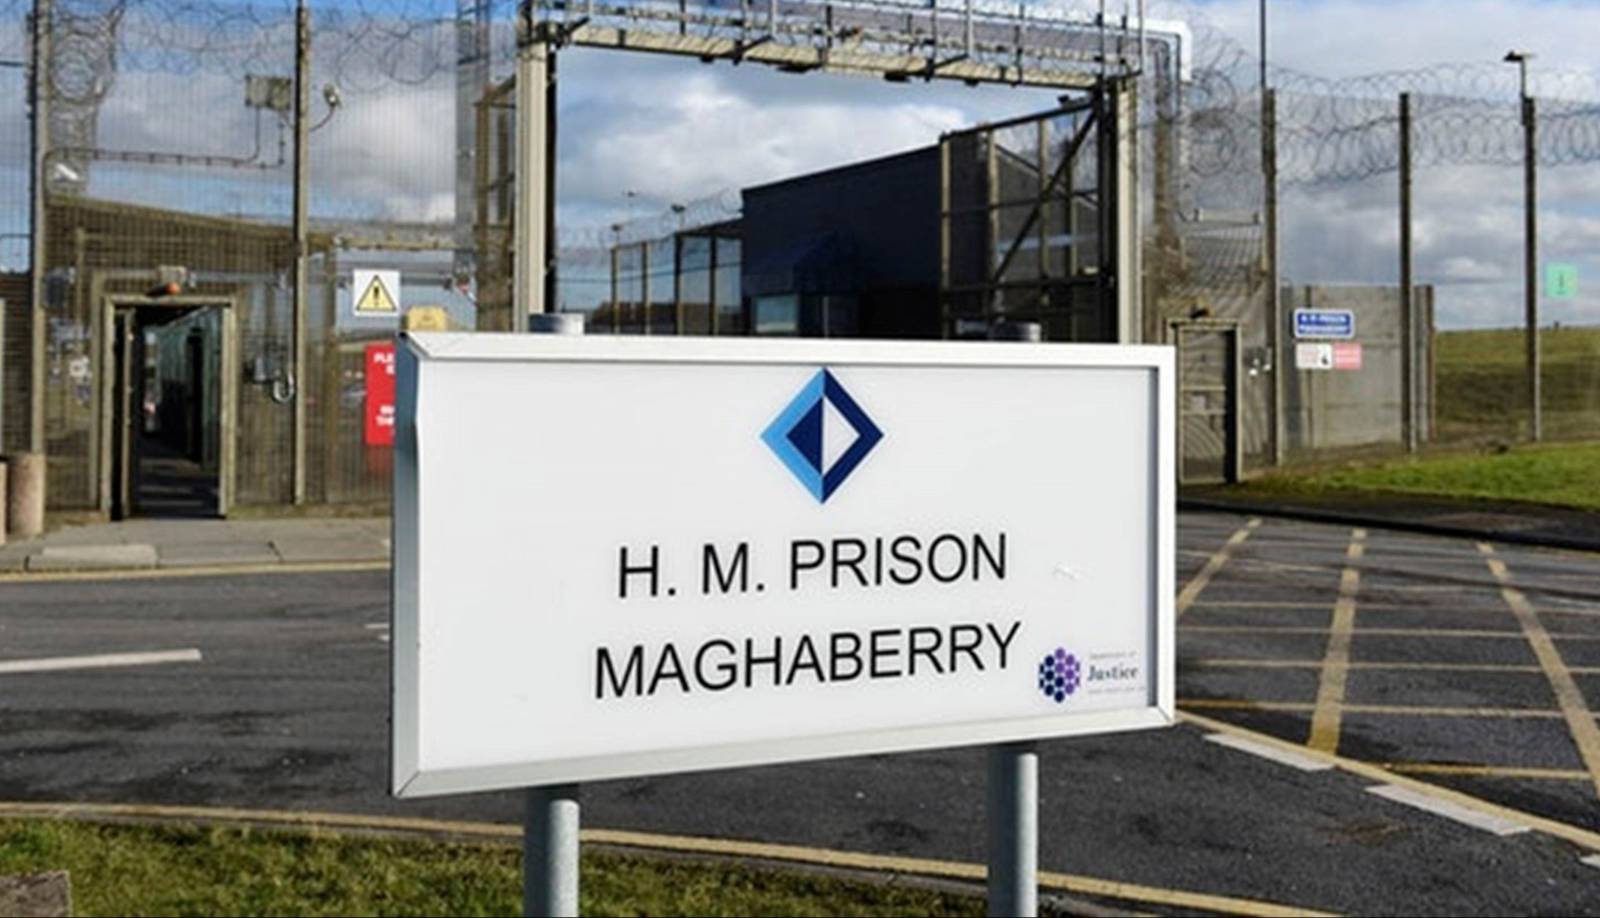 File photo dated 19/11/18 of the entrance to HMP Maghaberry in Co Antrim, Northern Ireland's high-security prison for men which houses a mixture of convicted prisoners and those who are yet to be tried. PRESS ASSOCIATION Photo. Picture date: Wednesday December 26, 2018. See PA story ULSTER Prisoners. Photo credit should read: Michael Cooper/PA Wire